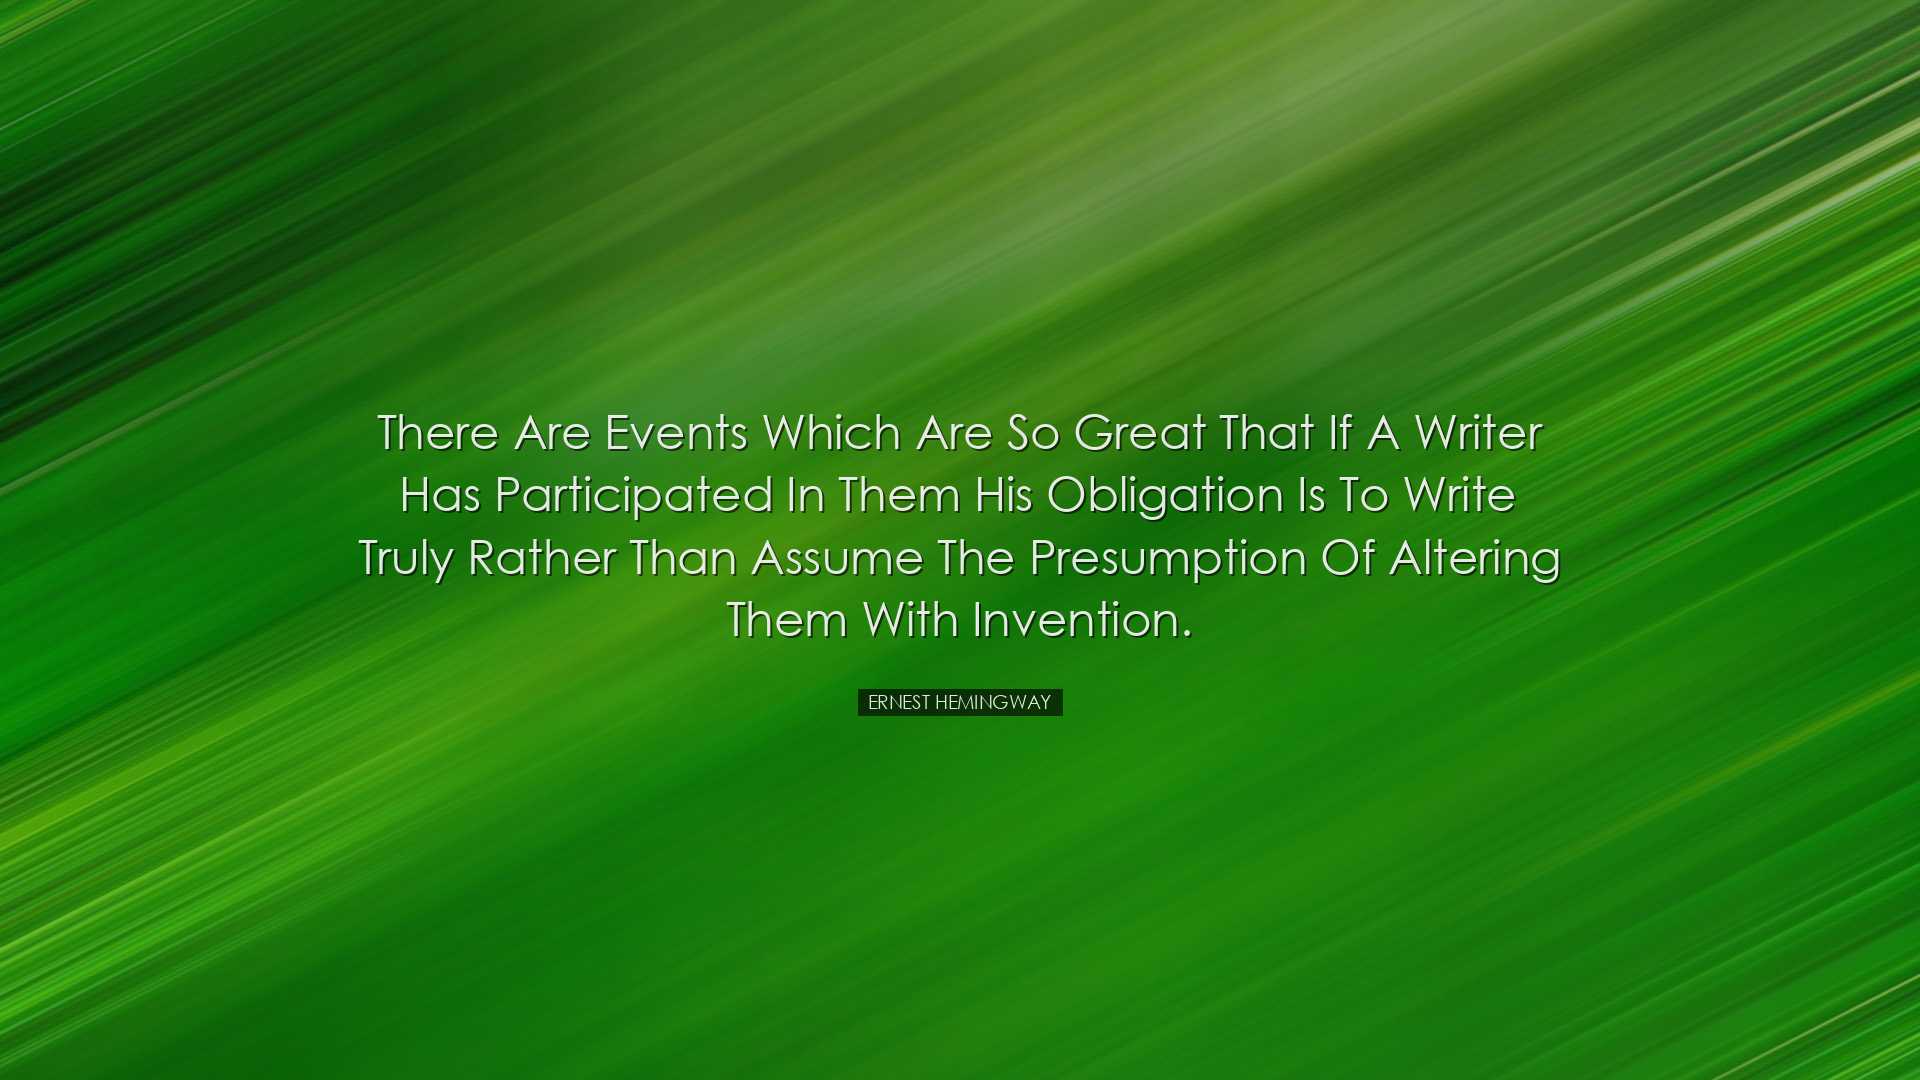 There are events which are so great that if a writer has participa